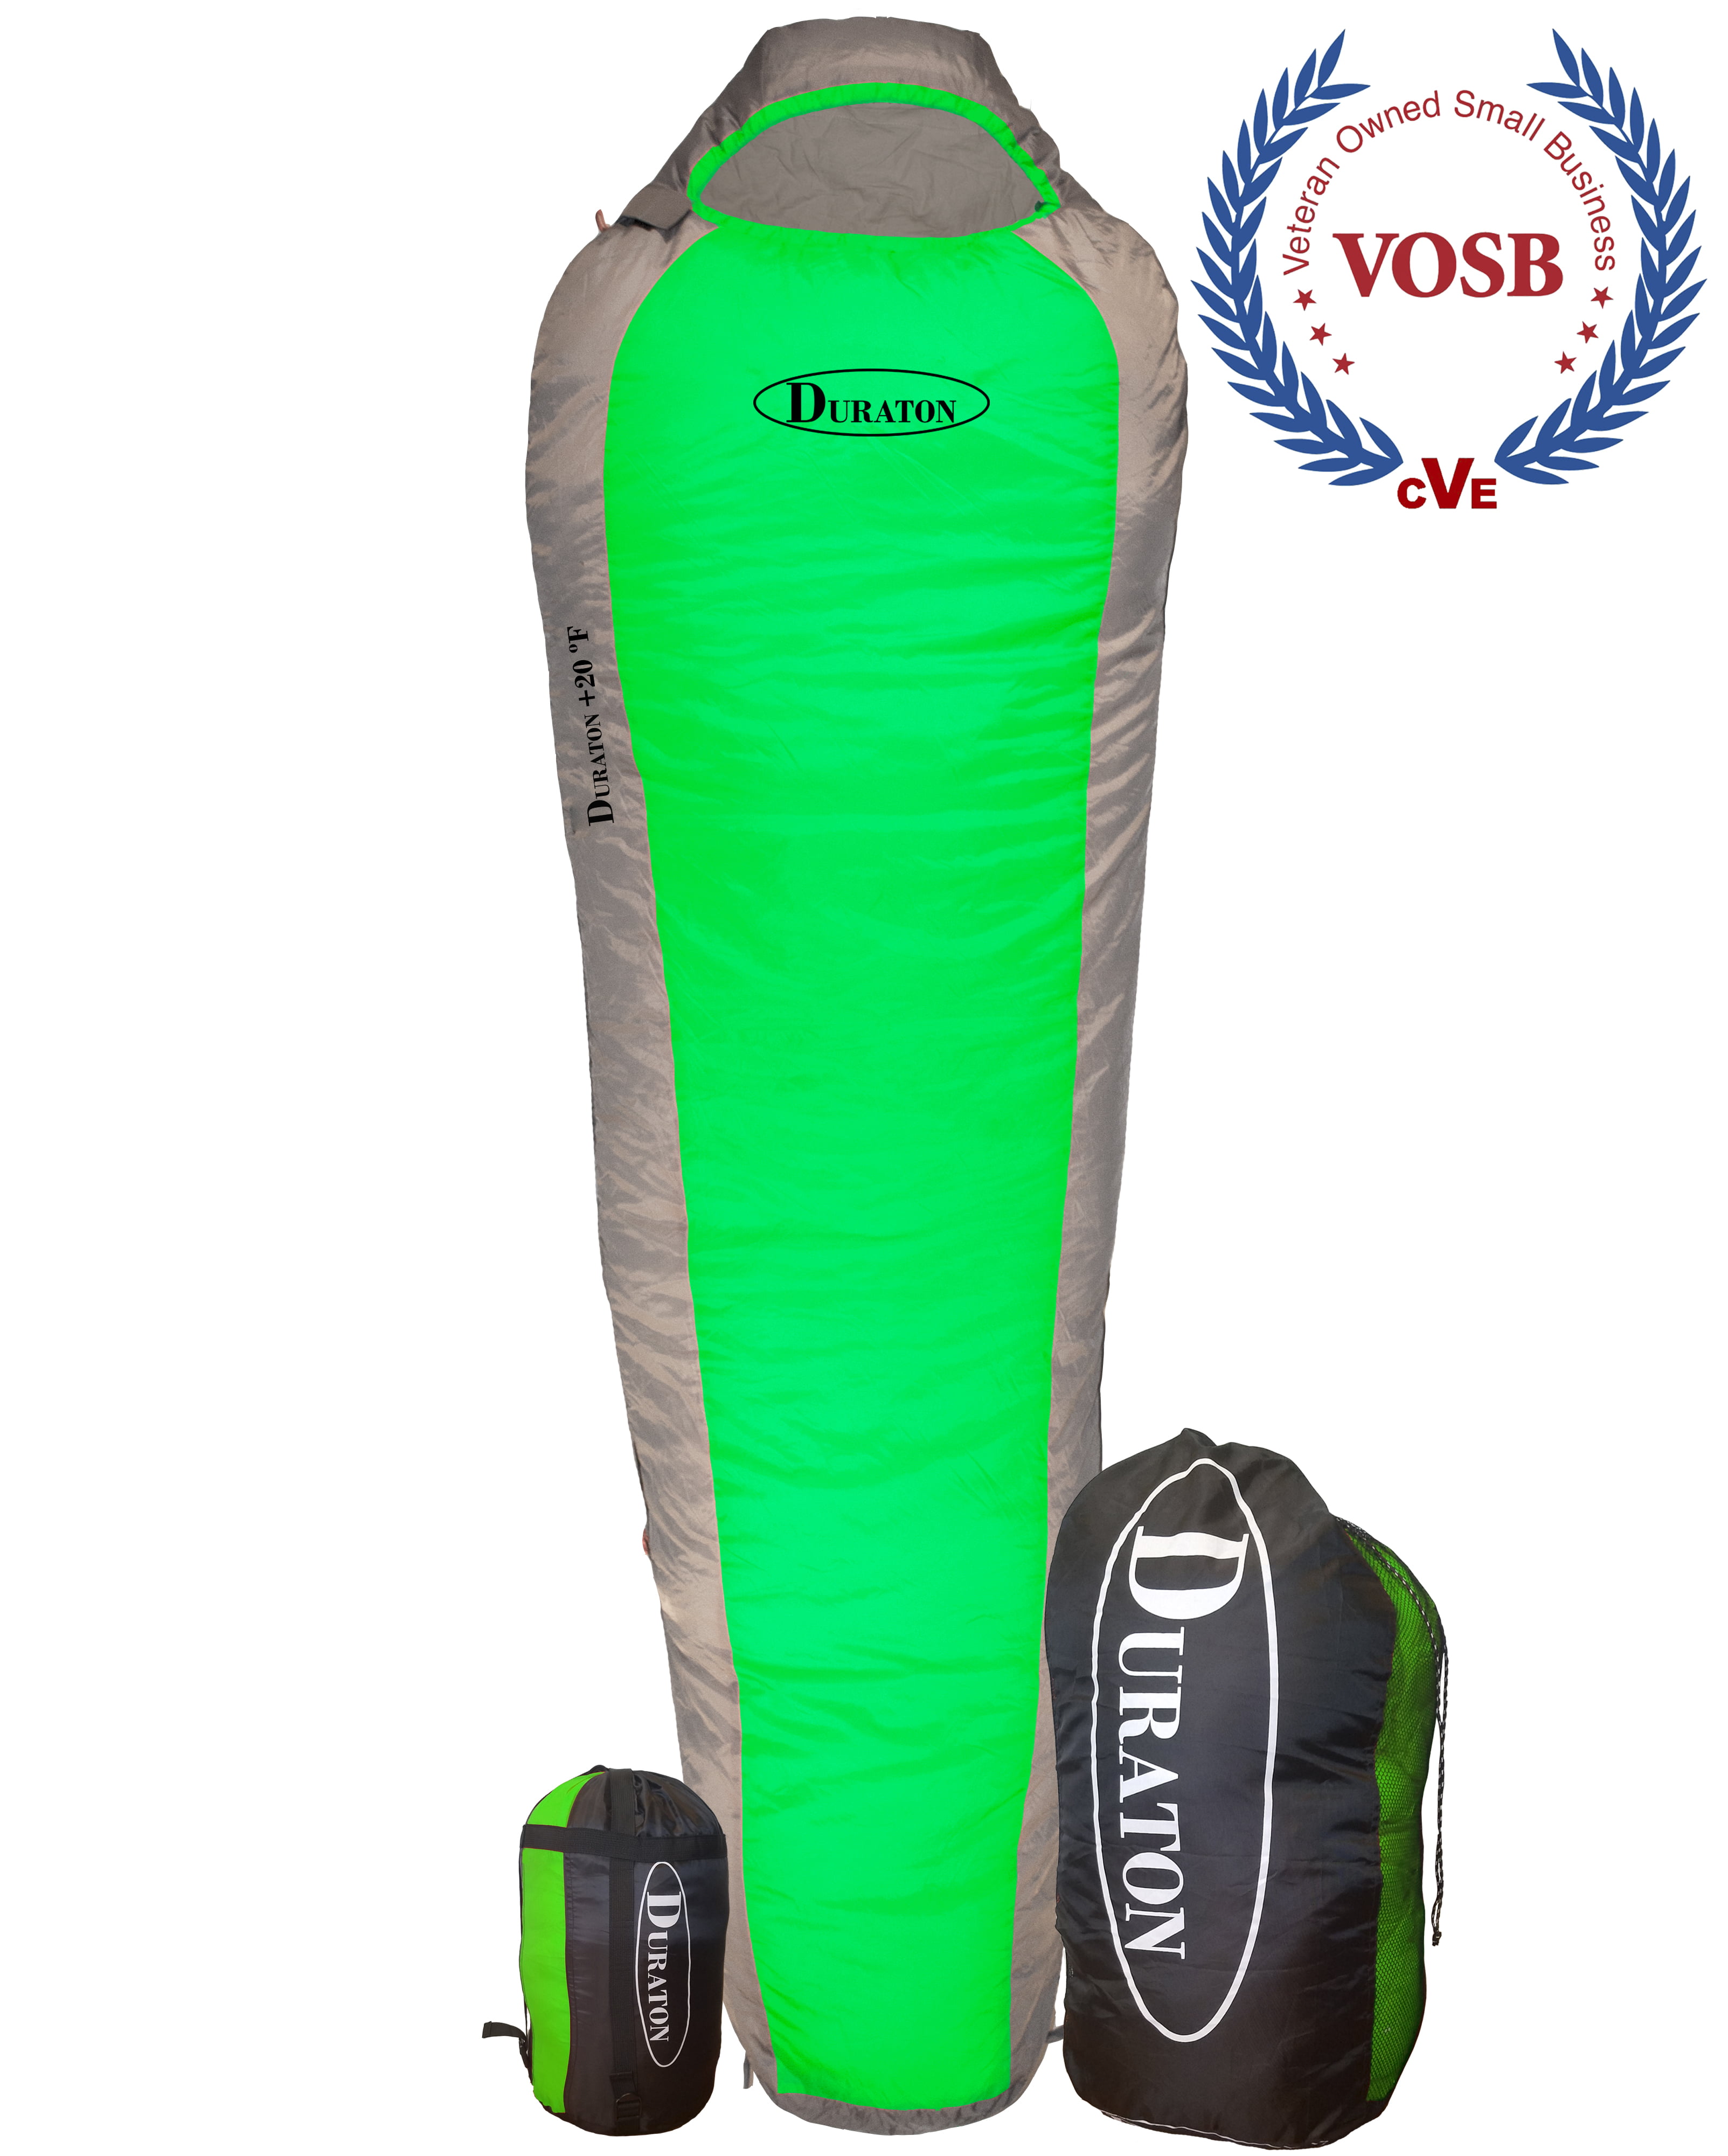 NEW 20 DEGREE LITE PAK BACKPACKING MUMMY BAG ONLY $49.95 with FREE SHIP 